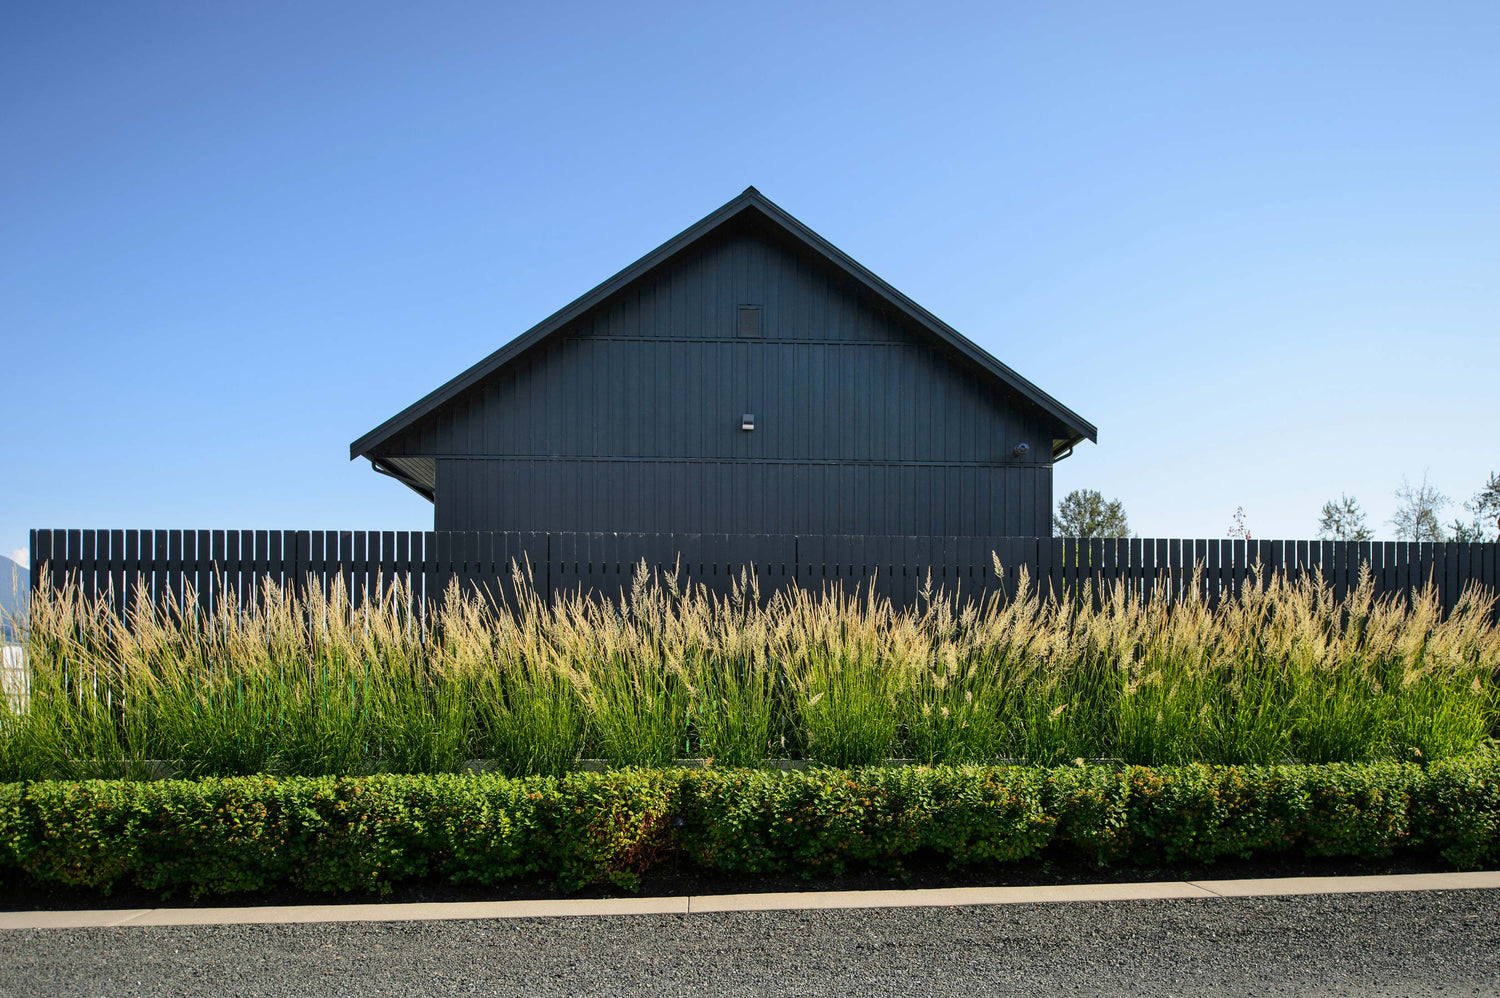 Bold black out building against brilliant blue sky with black picket fence, grasses and shrubs in the foreground. 